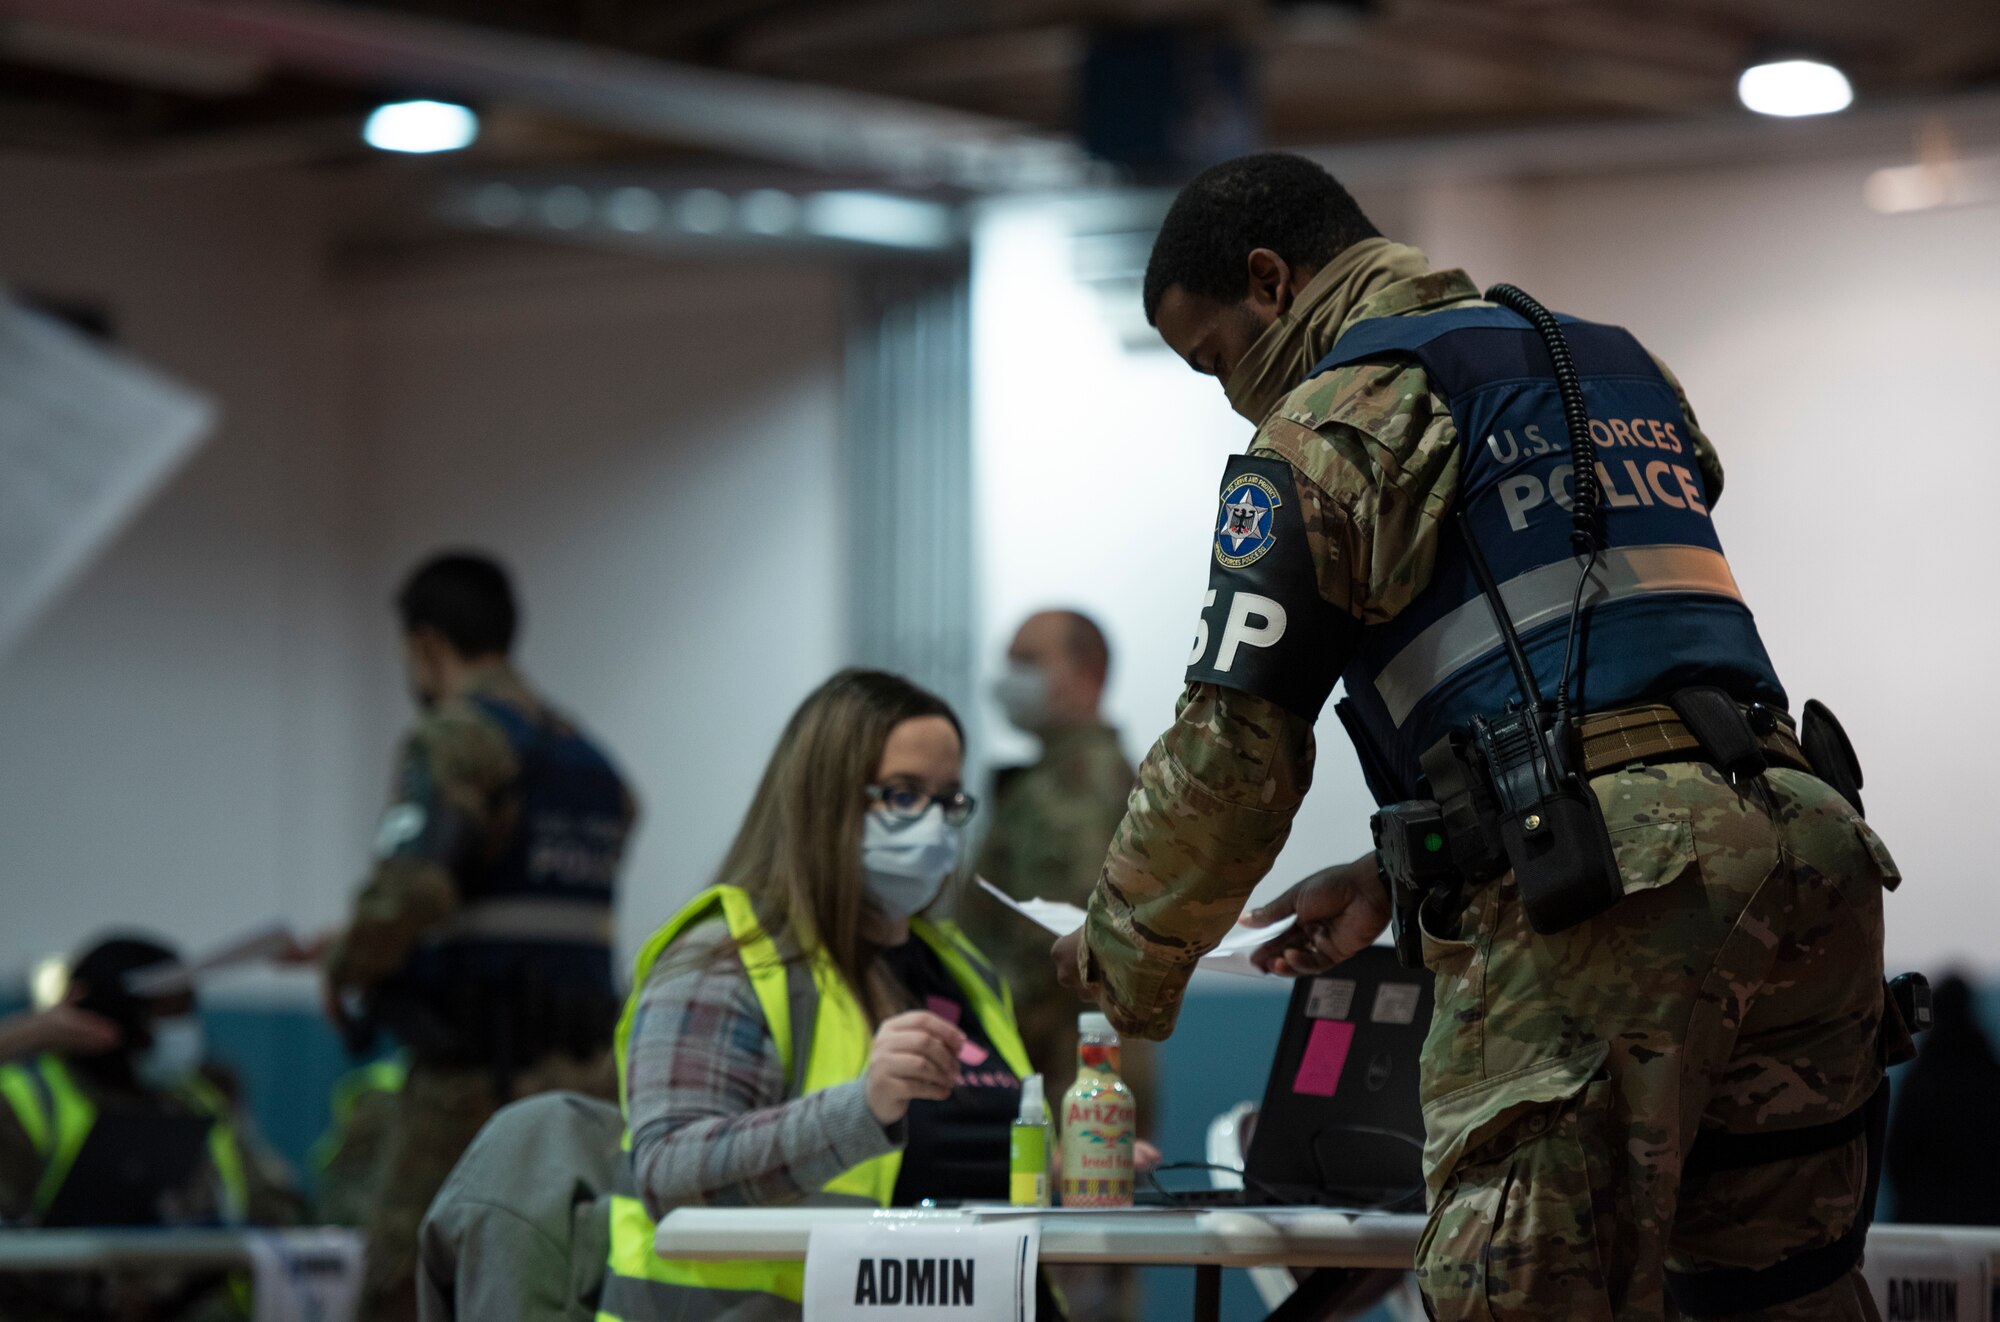 A 569th U.S. Forces Police Squadron first responder hands a document to an administrator at a vaccine clinic on Ramstein Air Base, Germany, Jan. 4, 2021.